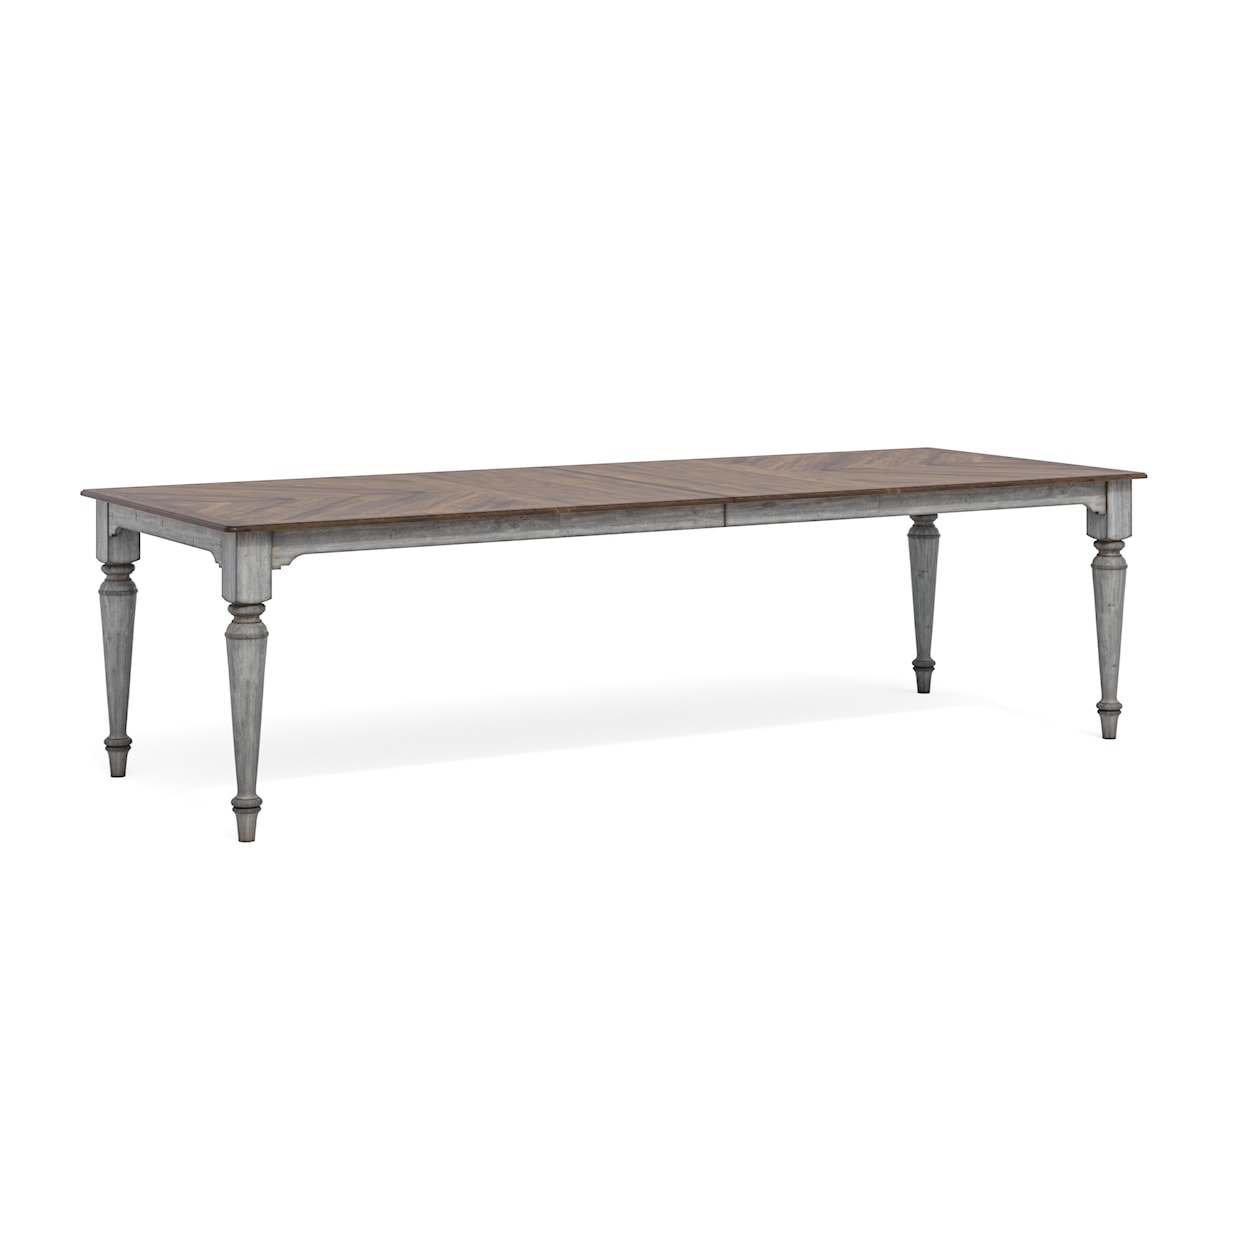 Flexsteel Wynwood Collection Plymouth Rectangular Dining Table